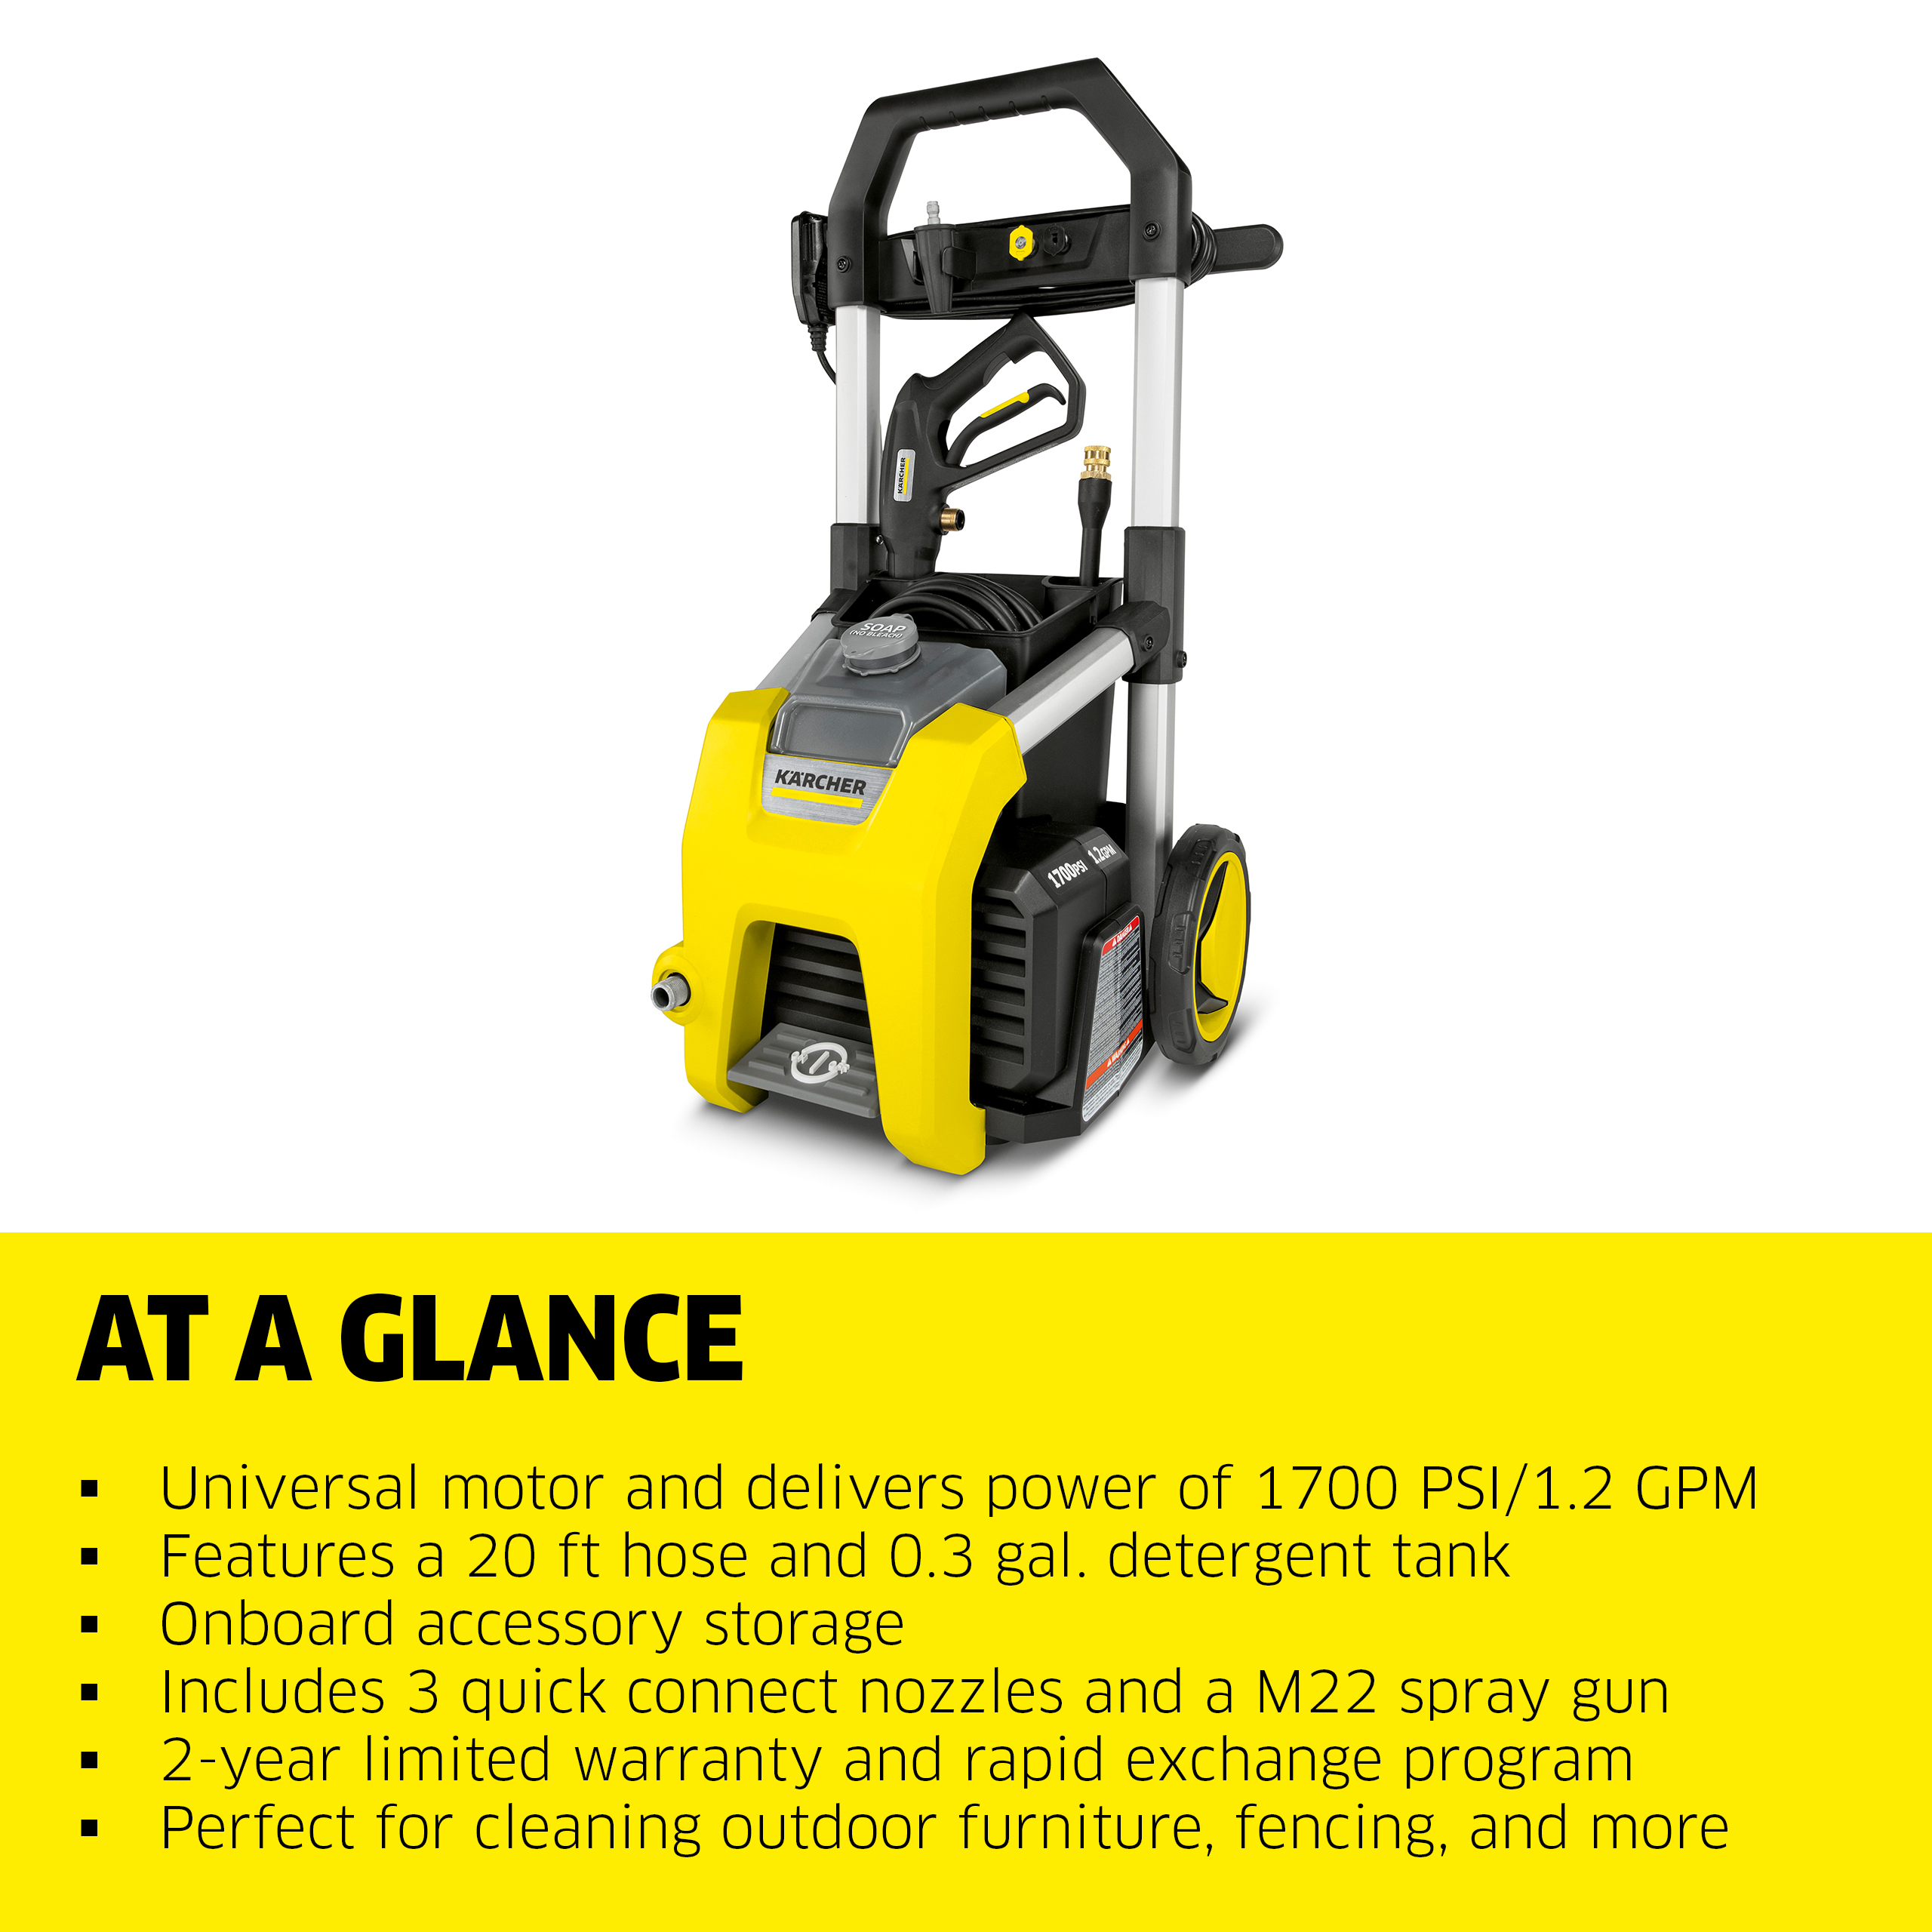 Karcher K1700, Max 2125 PSI Pressure Washer with Hose, Spray Gun, 3 Nozzles, 1.2 GPM, Power Washer - image 4 of 9